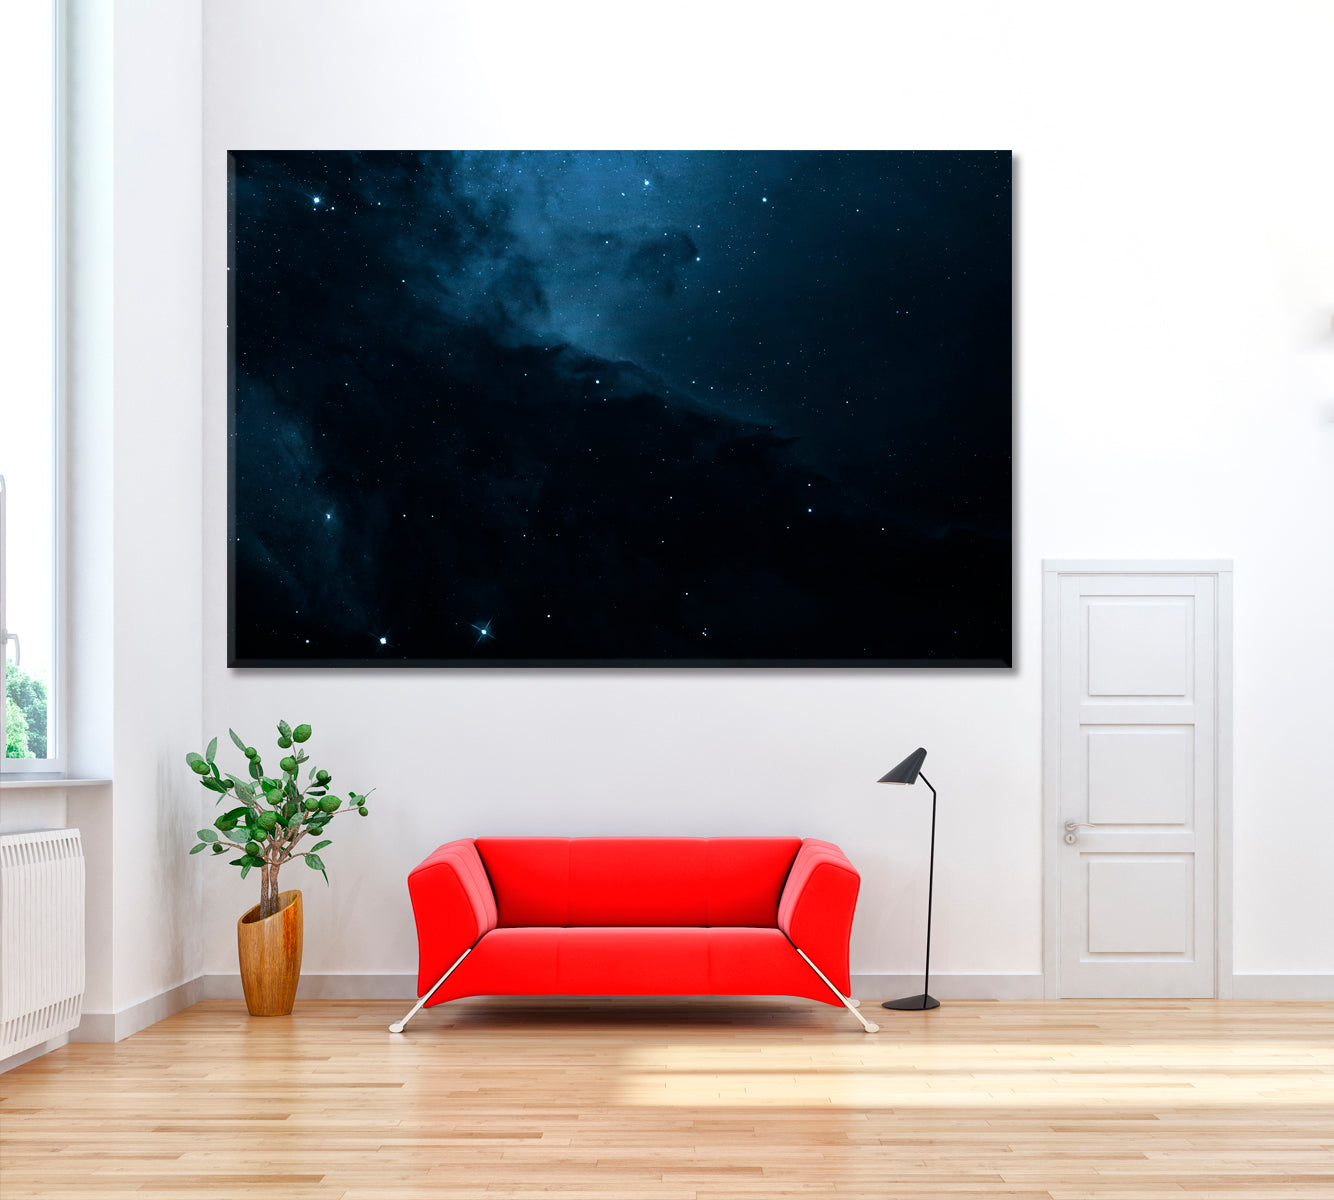 Starfield in Deep Space Canvas Print ArtLexy 1 Panel 24"x16" inches 